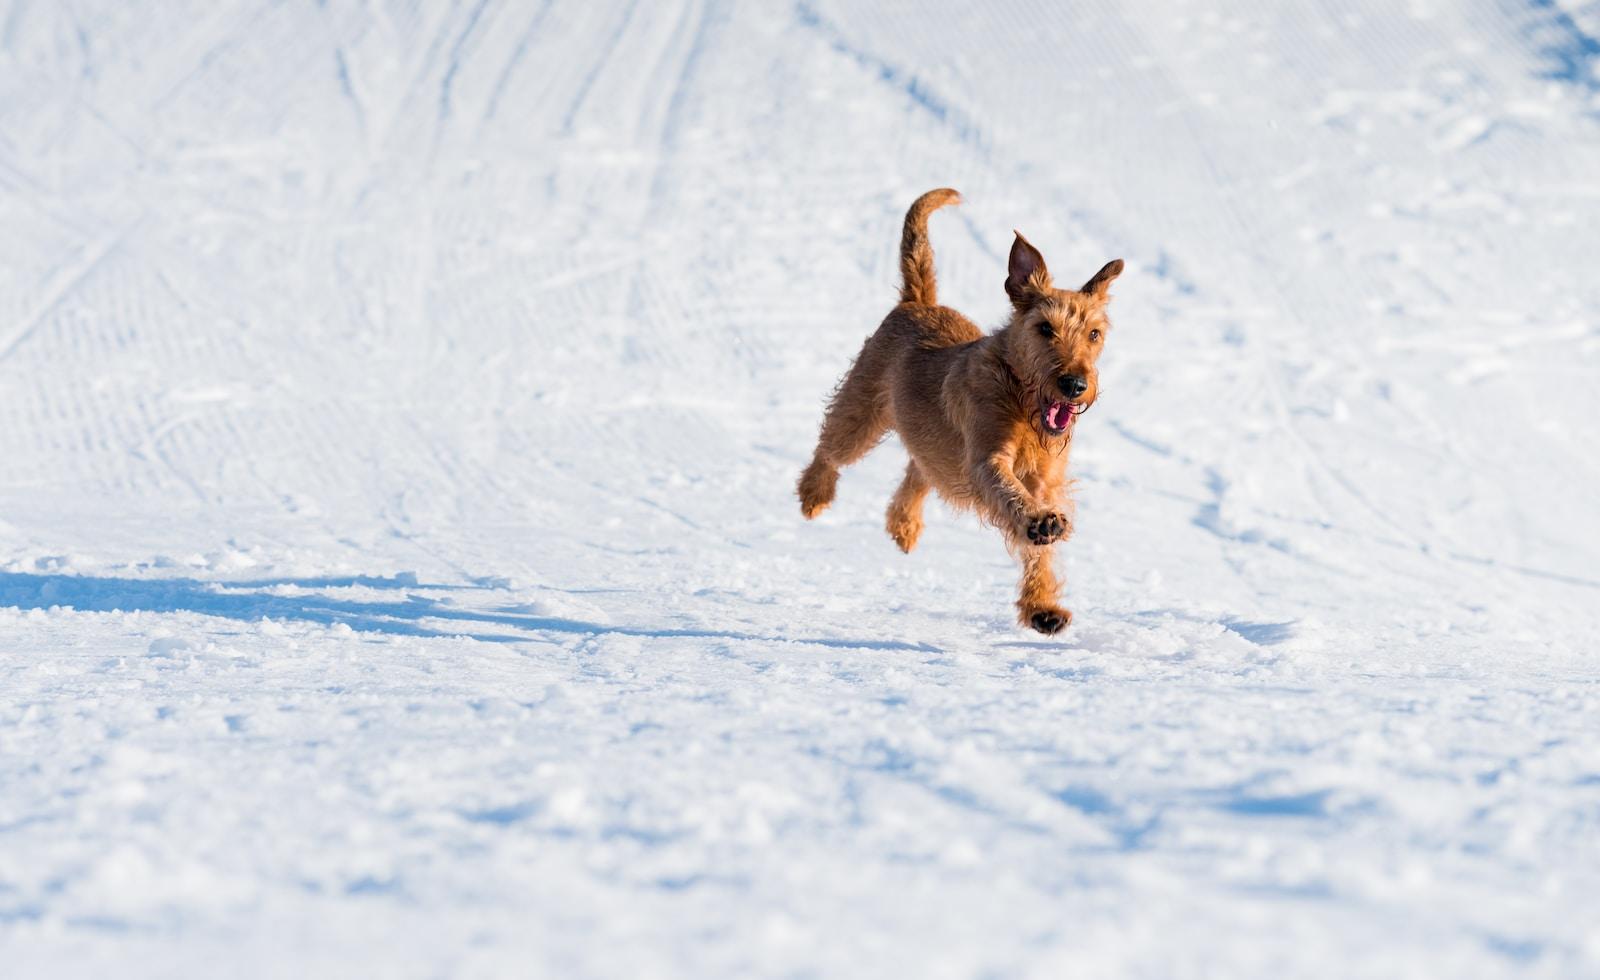 ways to walk in the snow that you shouldn't let your dog do!